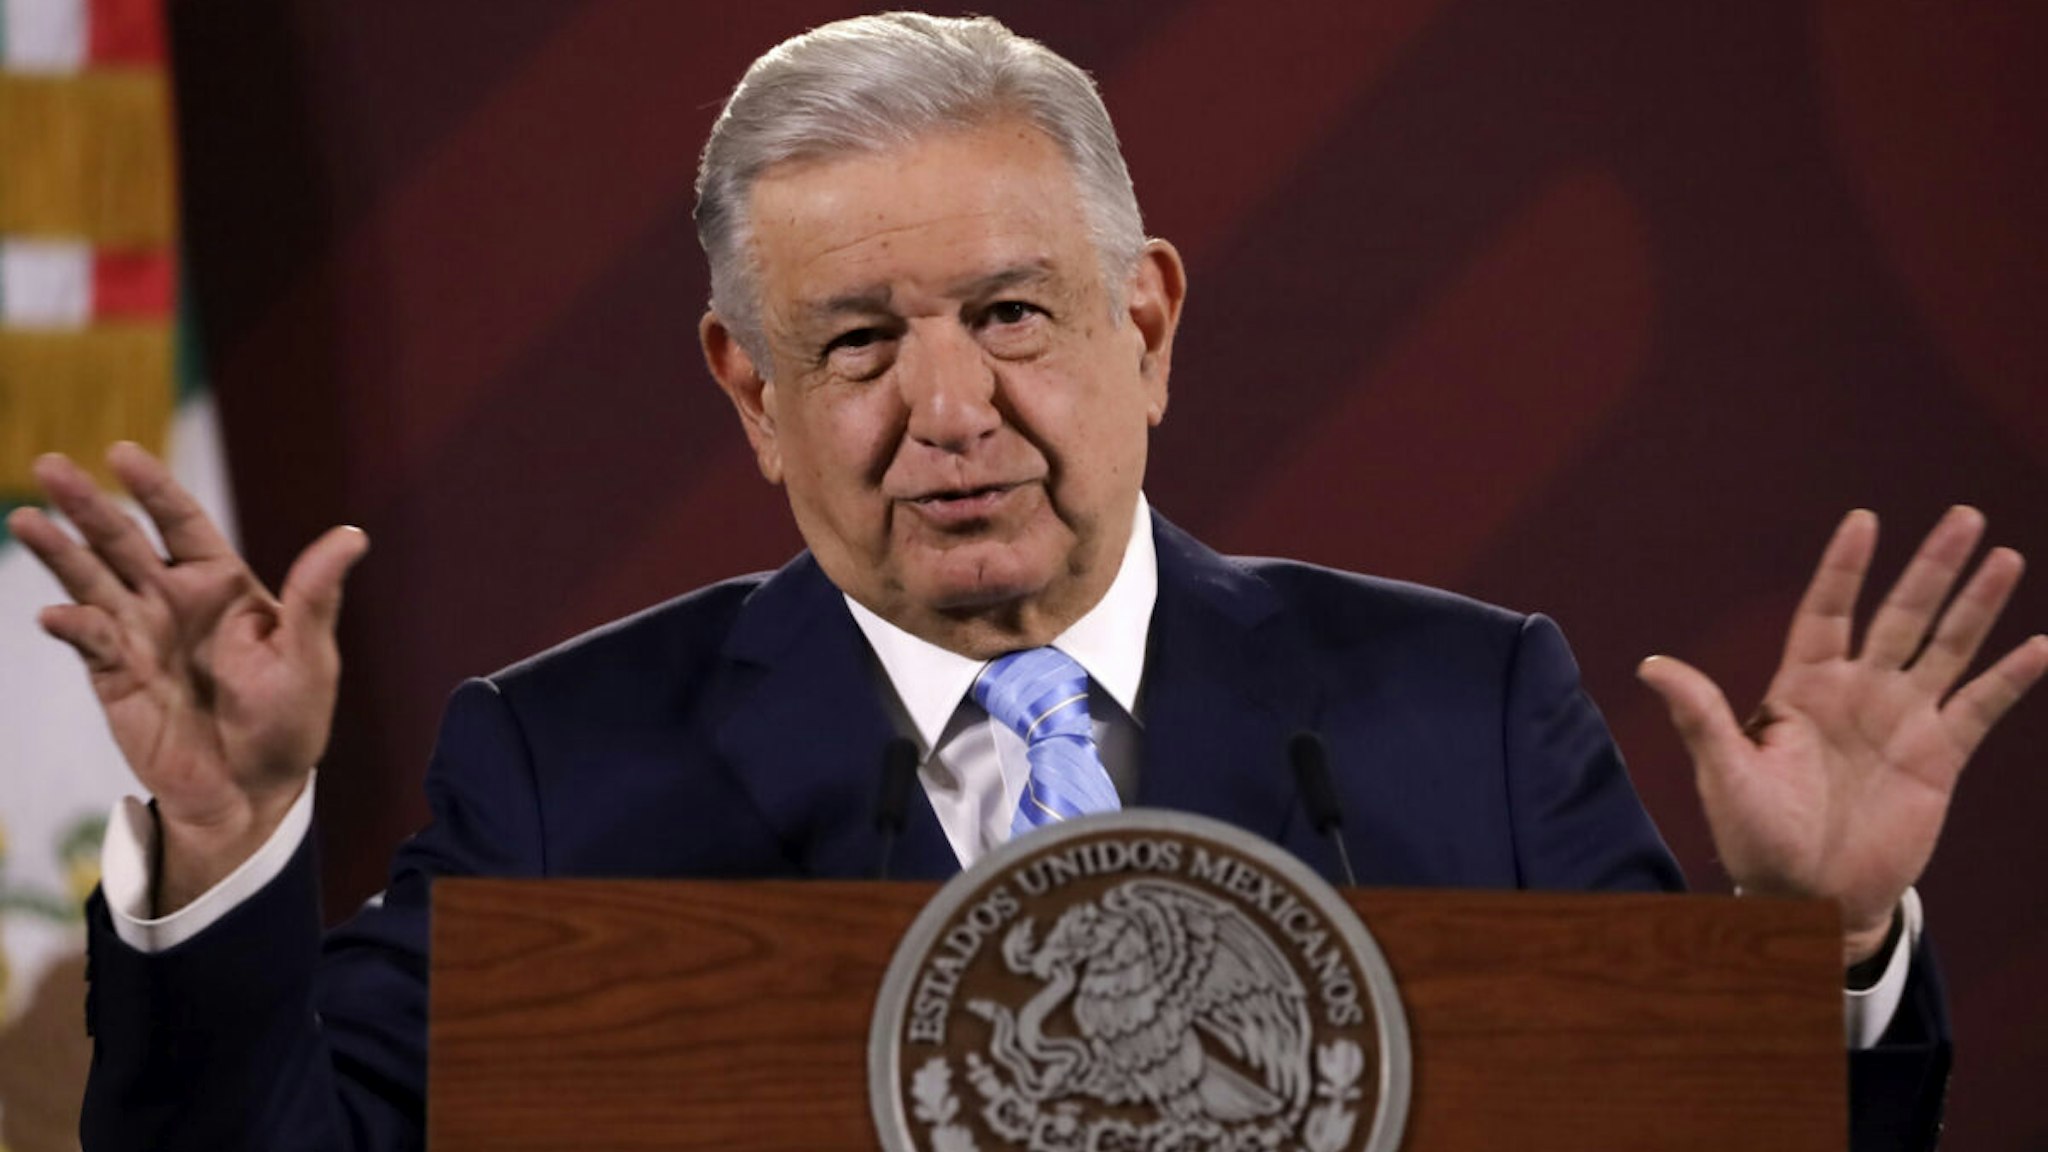 March 13, 2023, Mexico City, Mexico: The President of Mexico, Andres Manuel Lopez Obrador during the press conference before reporters at the National Palace in Mexico City